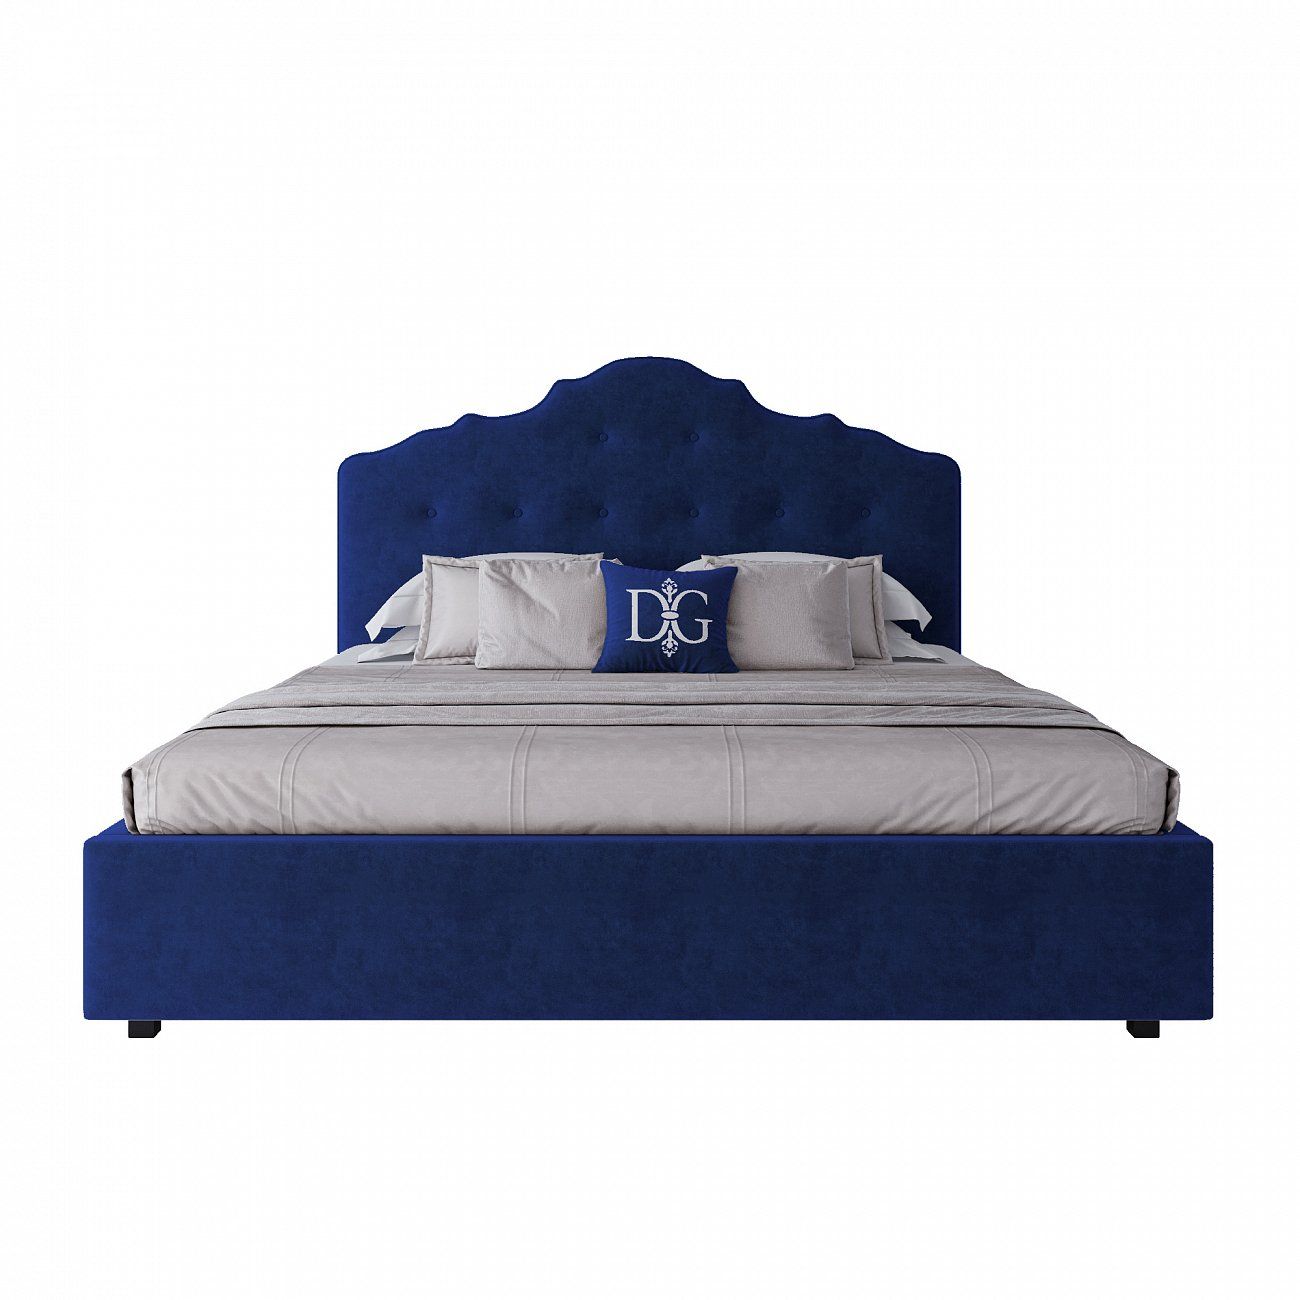 Double bed 180x200 blue Palace